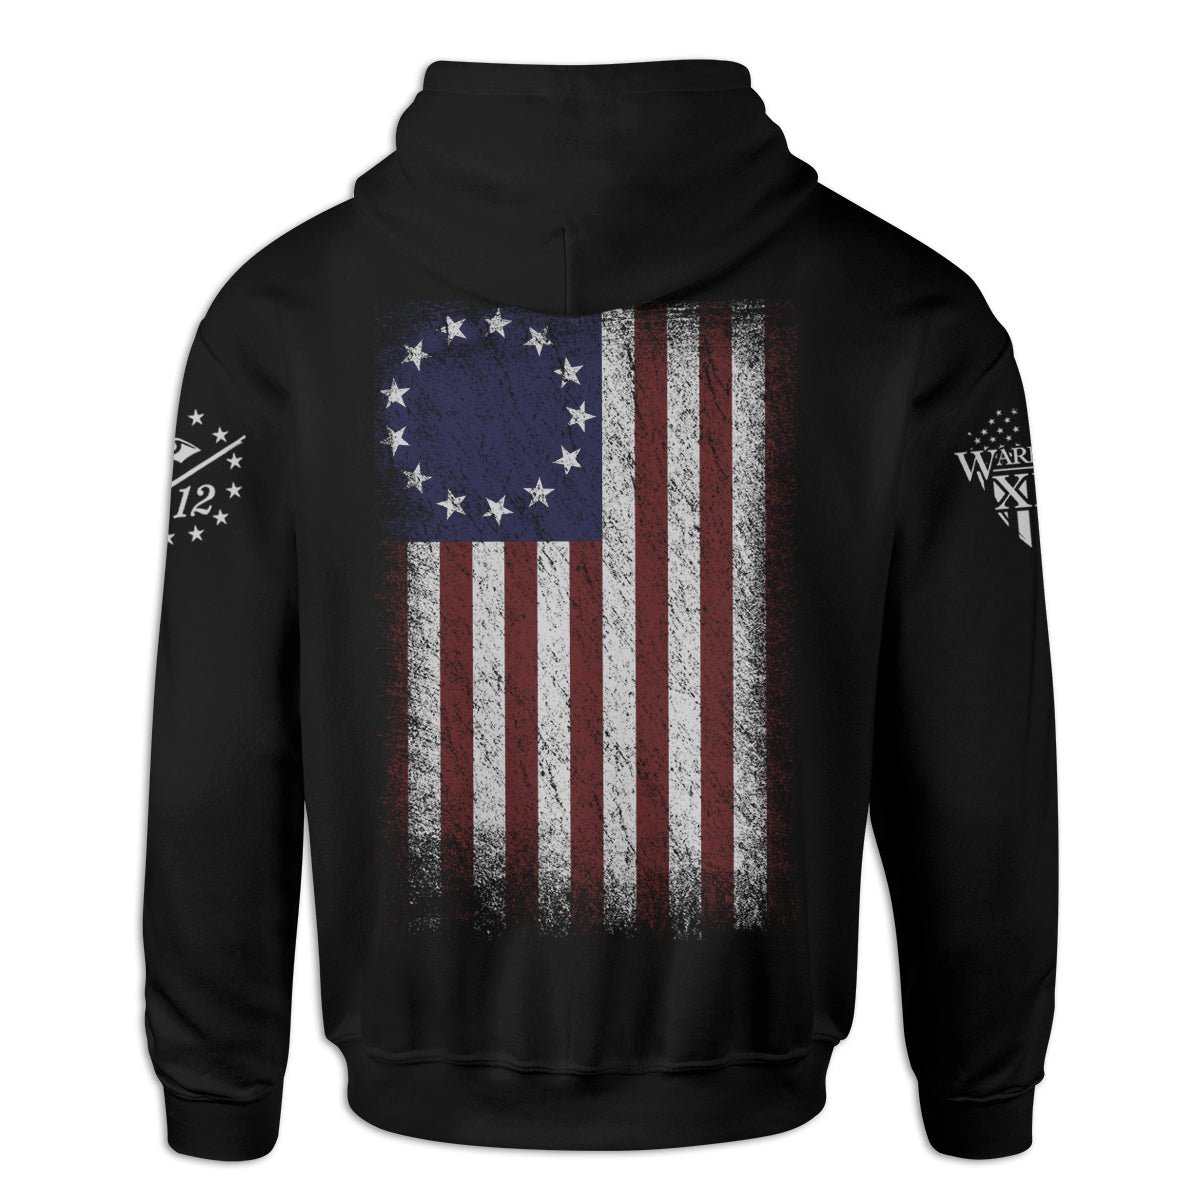 Warrior 12 - Betsy Ross Flag Hoodie - Angler's Pro Tackle & Outdoors